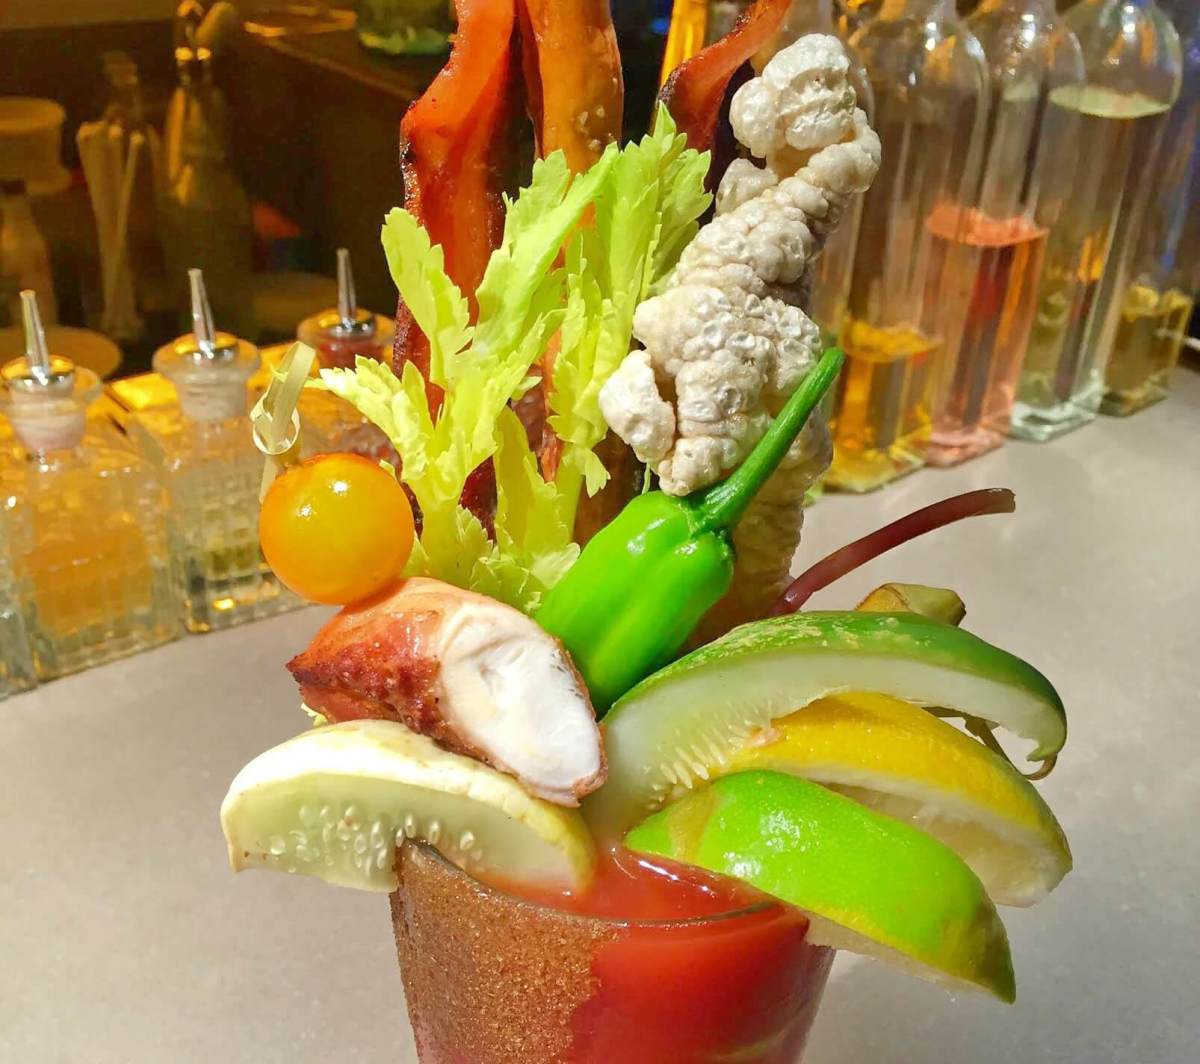 Overload your Bloody Mary with octopus, cheeses and more at this new DIY bar